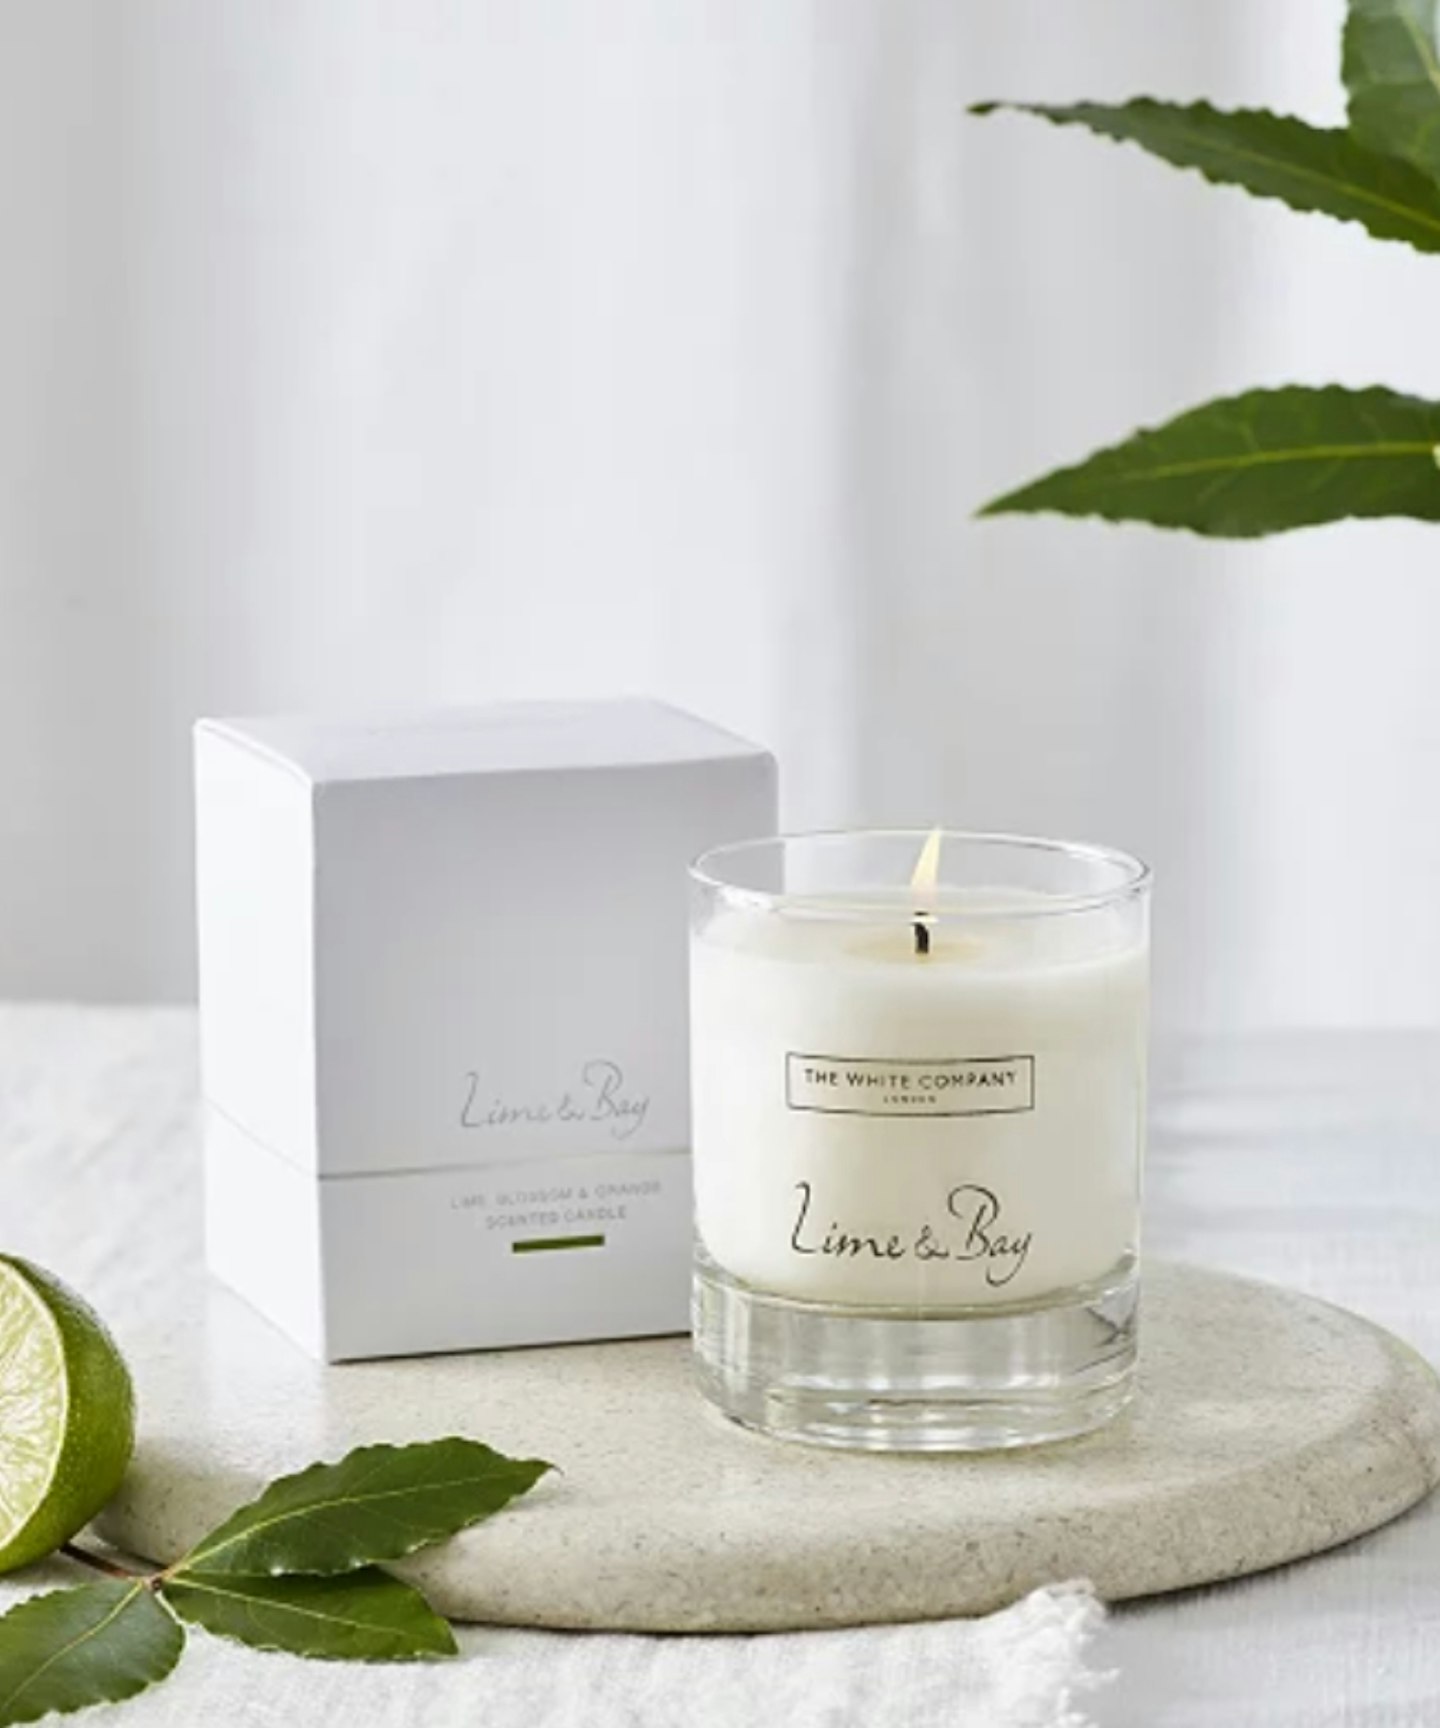 International Women's Day gifts The White Company, Candles (Donation to: #ChangeAGirlsLife Campaign)